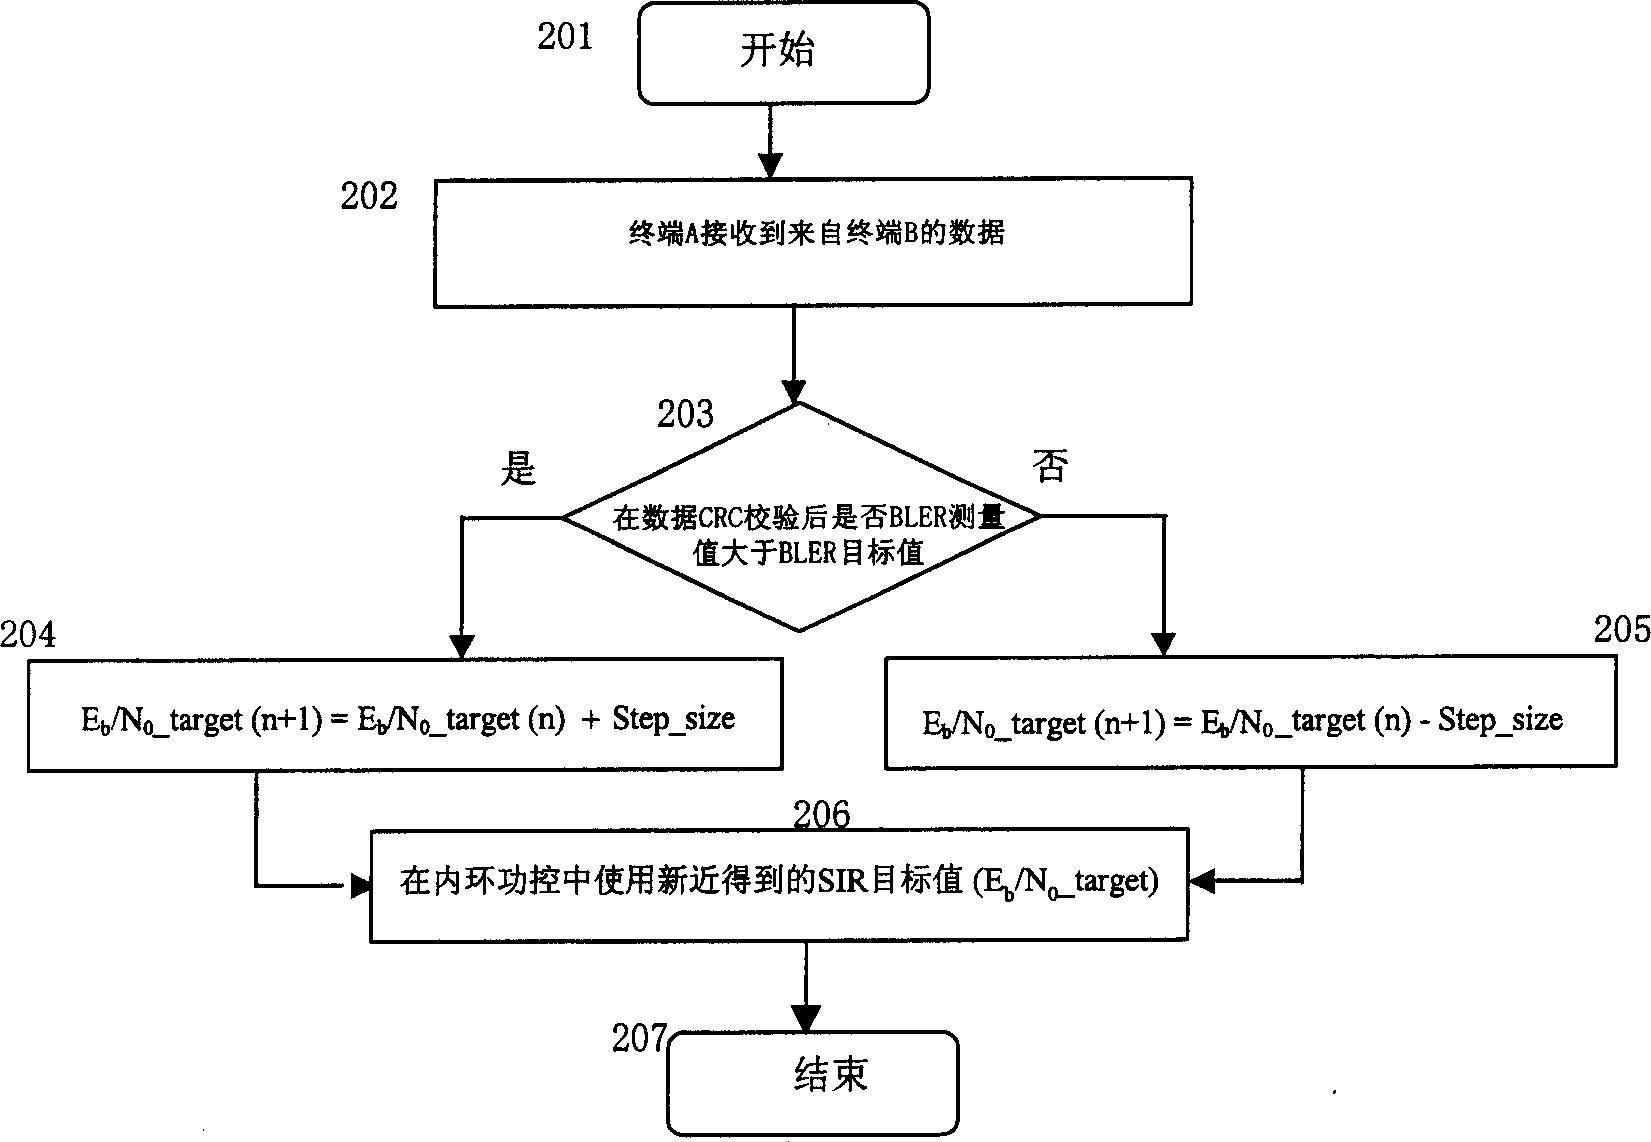 Power control method of end-to-end direct communication of NB TDD CDMA mobile communication system